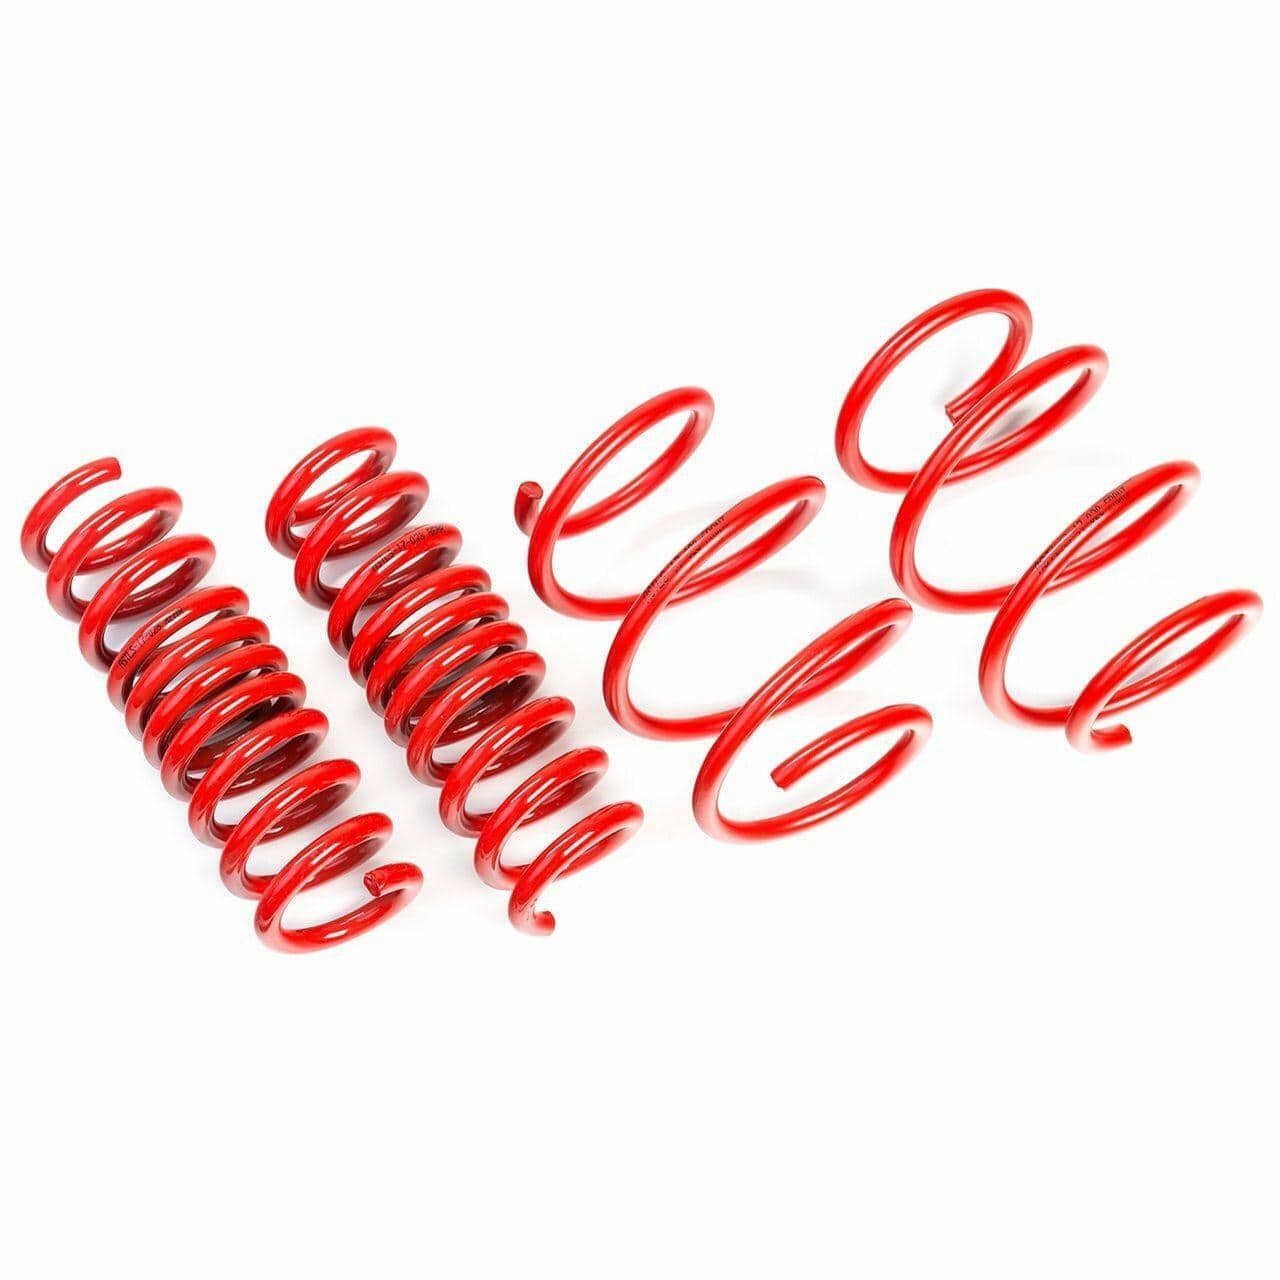 AST Suspension Lowering Springs (30MM/30MM TUV) - 2001-2008 Audi A4 Avant Automatic Gear 2.0 (8E) ASTLS-14-152